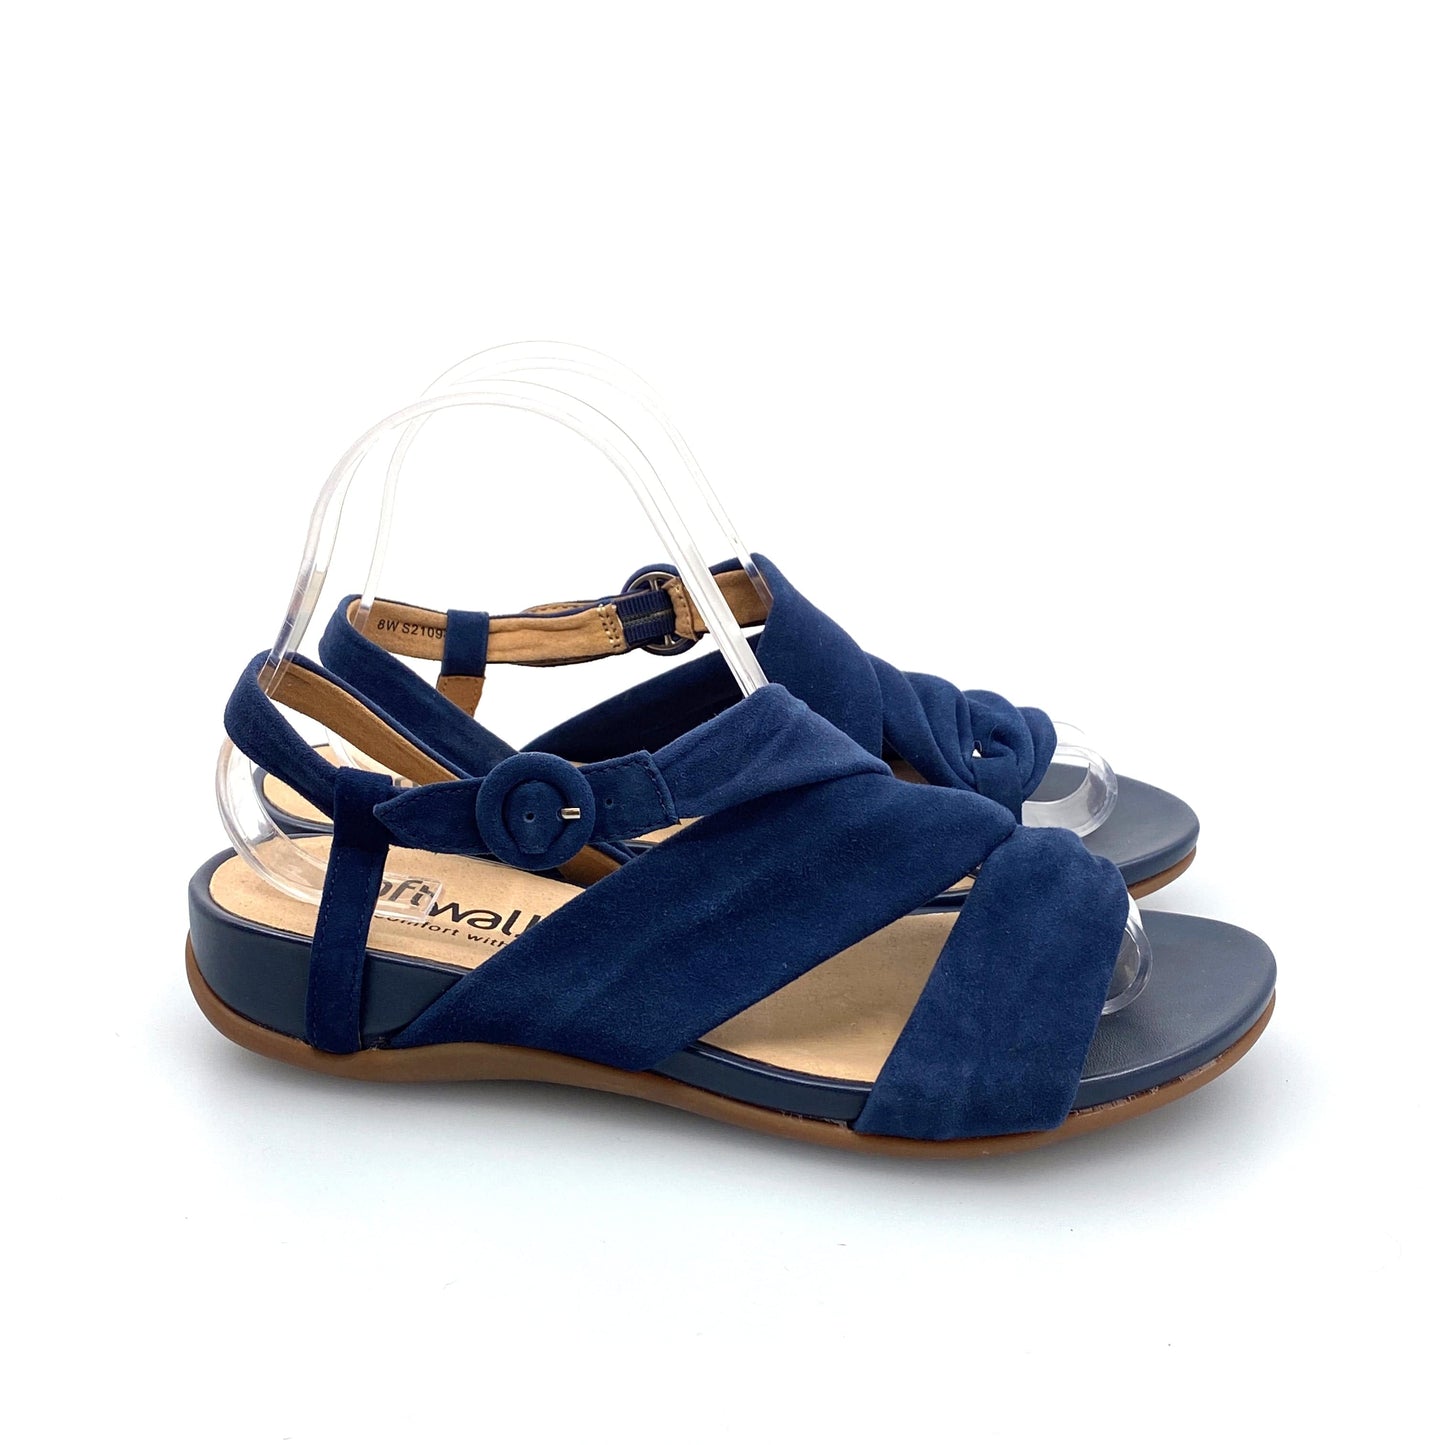 Softwalk Tieli Womens Size 8W Navy Blue Strappy Buckle Sandals Shoes